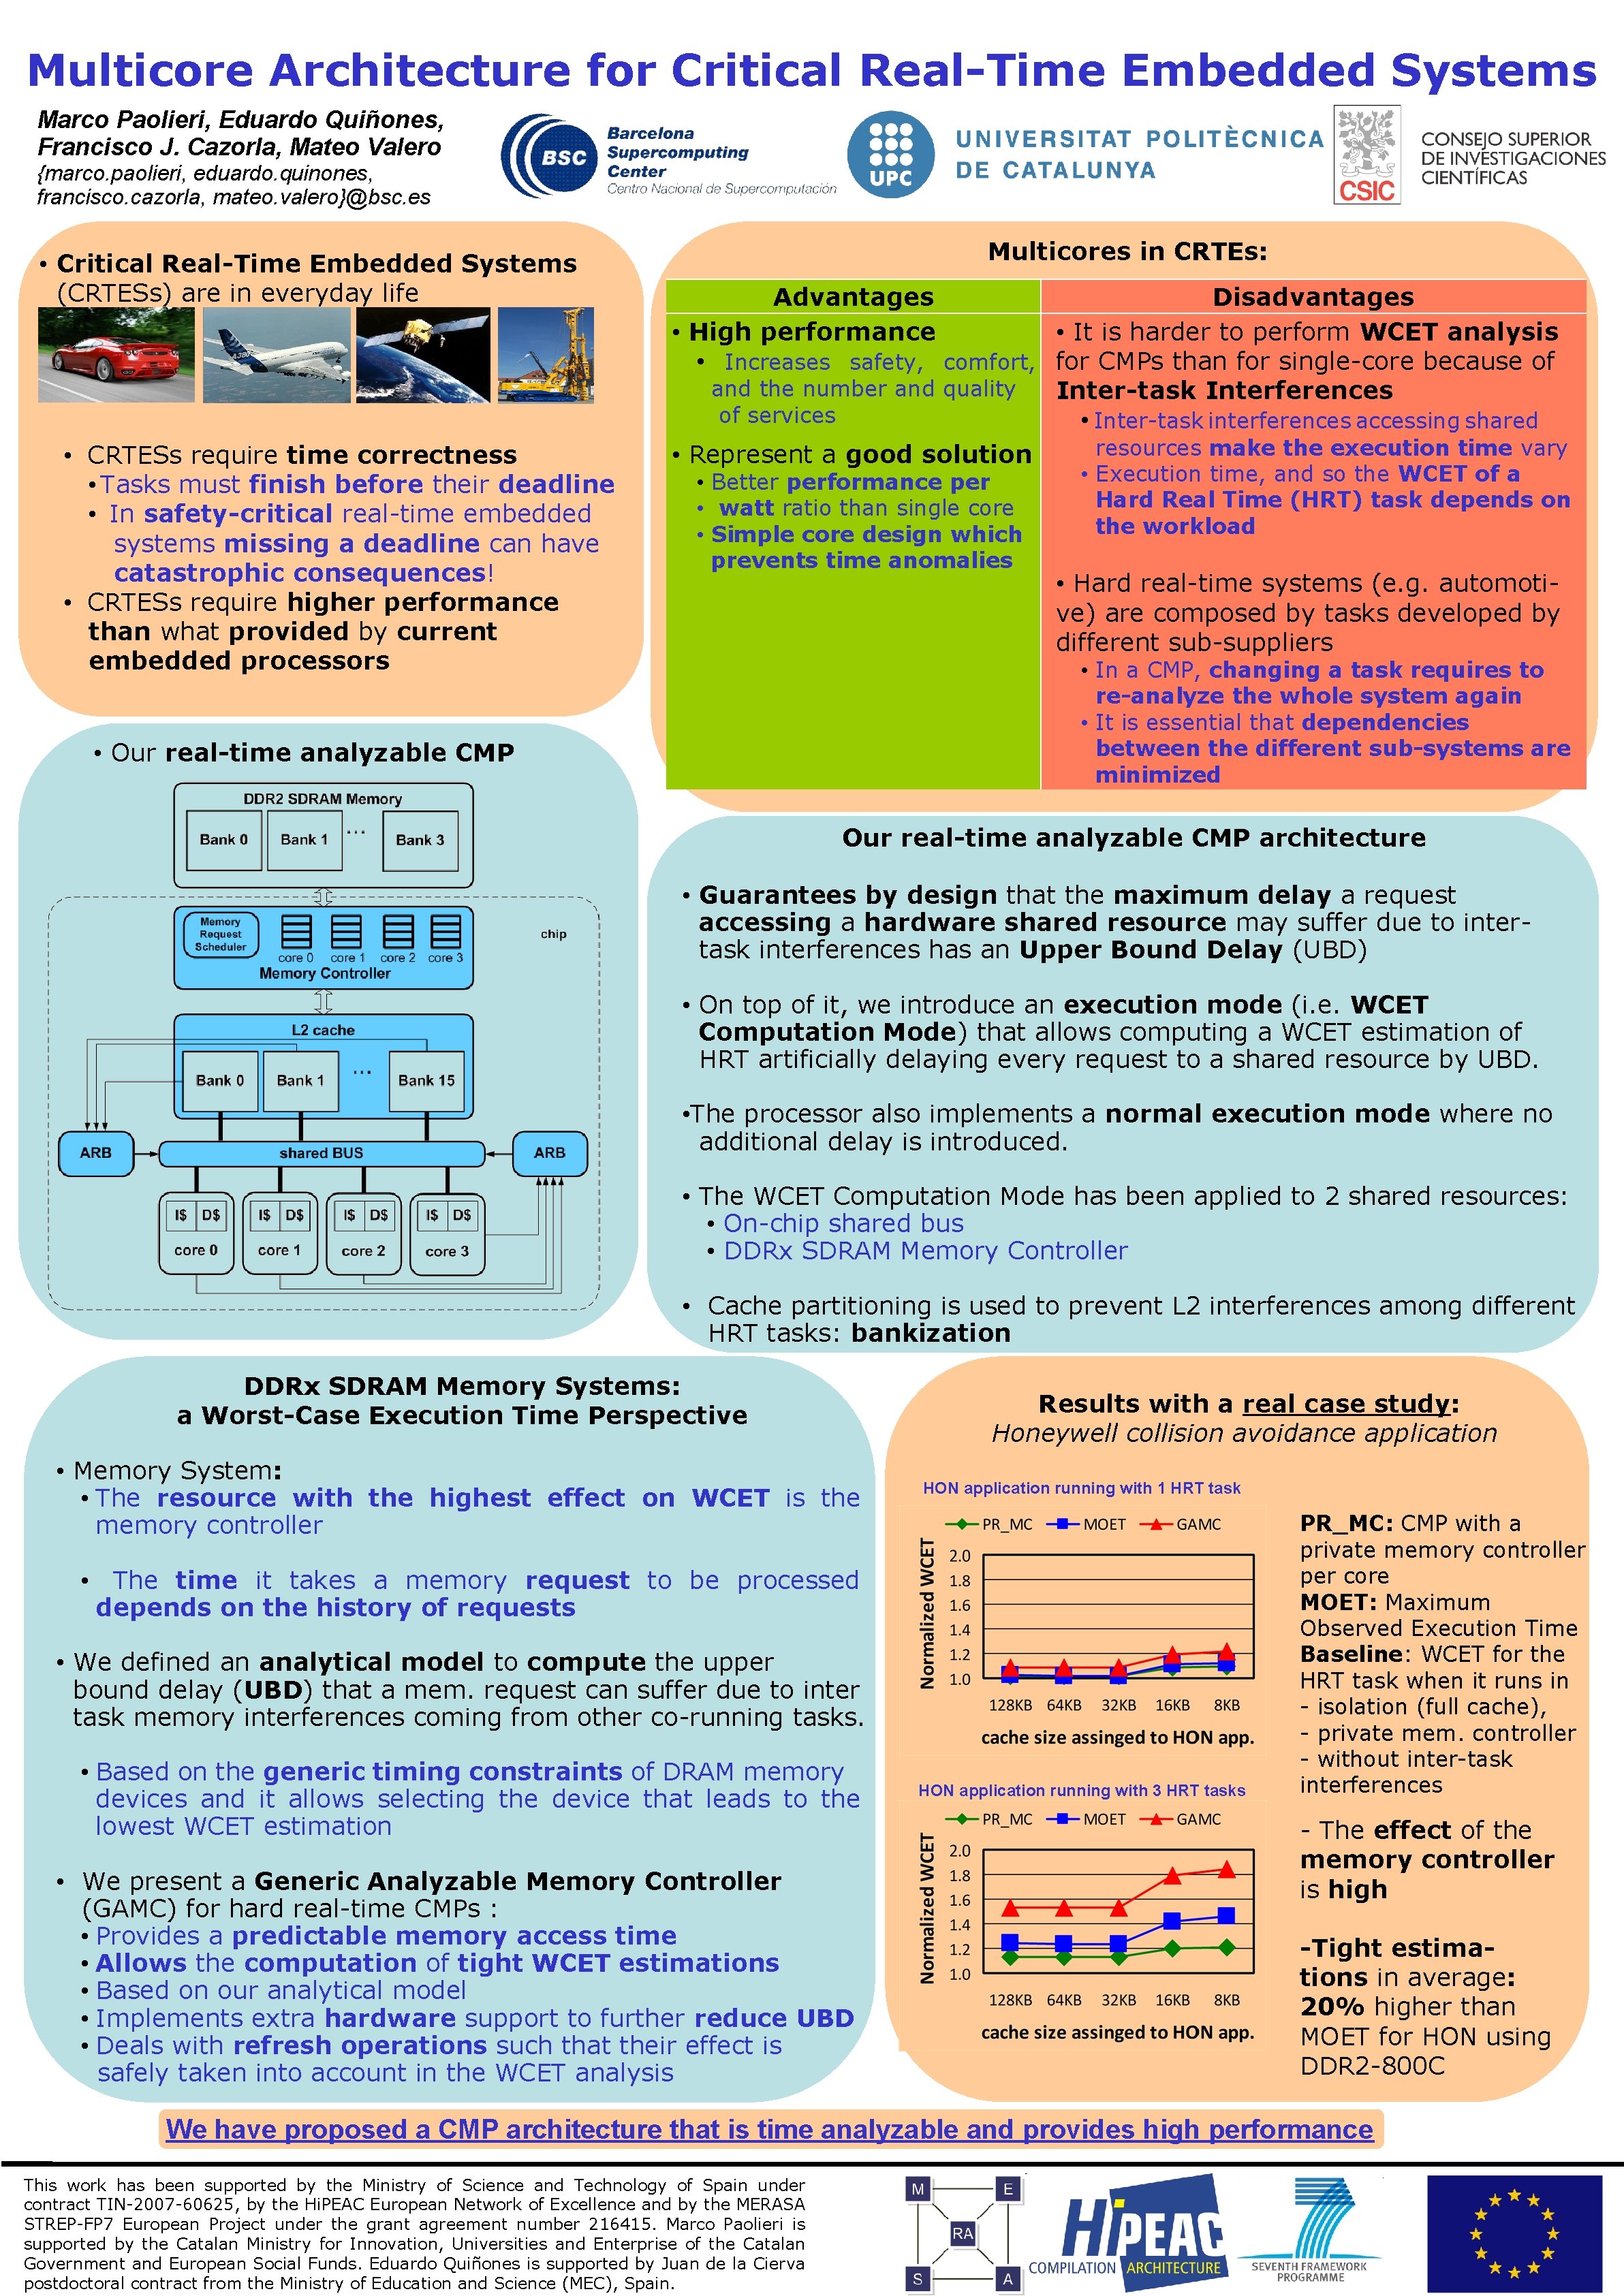 Multicore Architecture for Critical Real-Time Embedded Systems Marco Paolieri, Eduardo Quiñones, Francisco J. Cazorla,